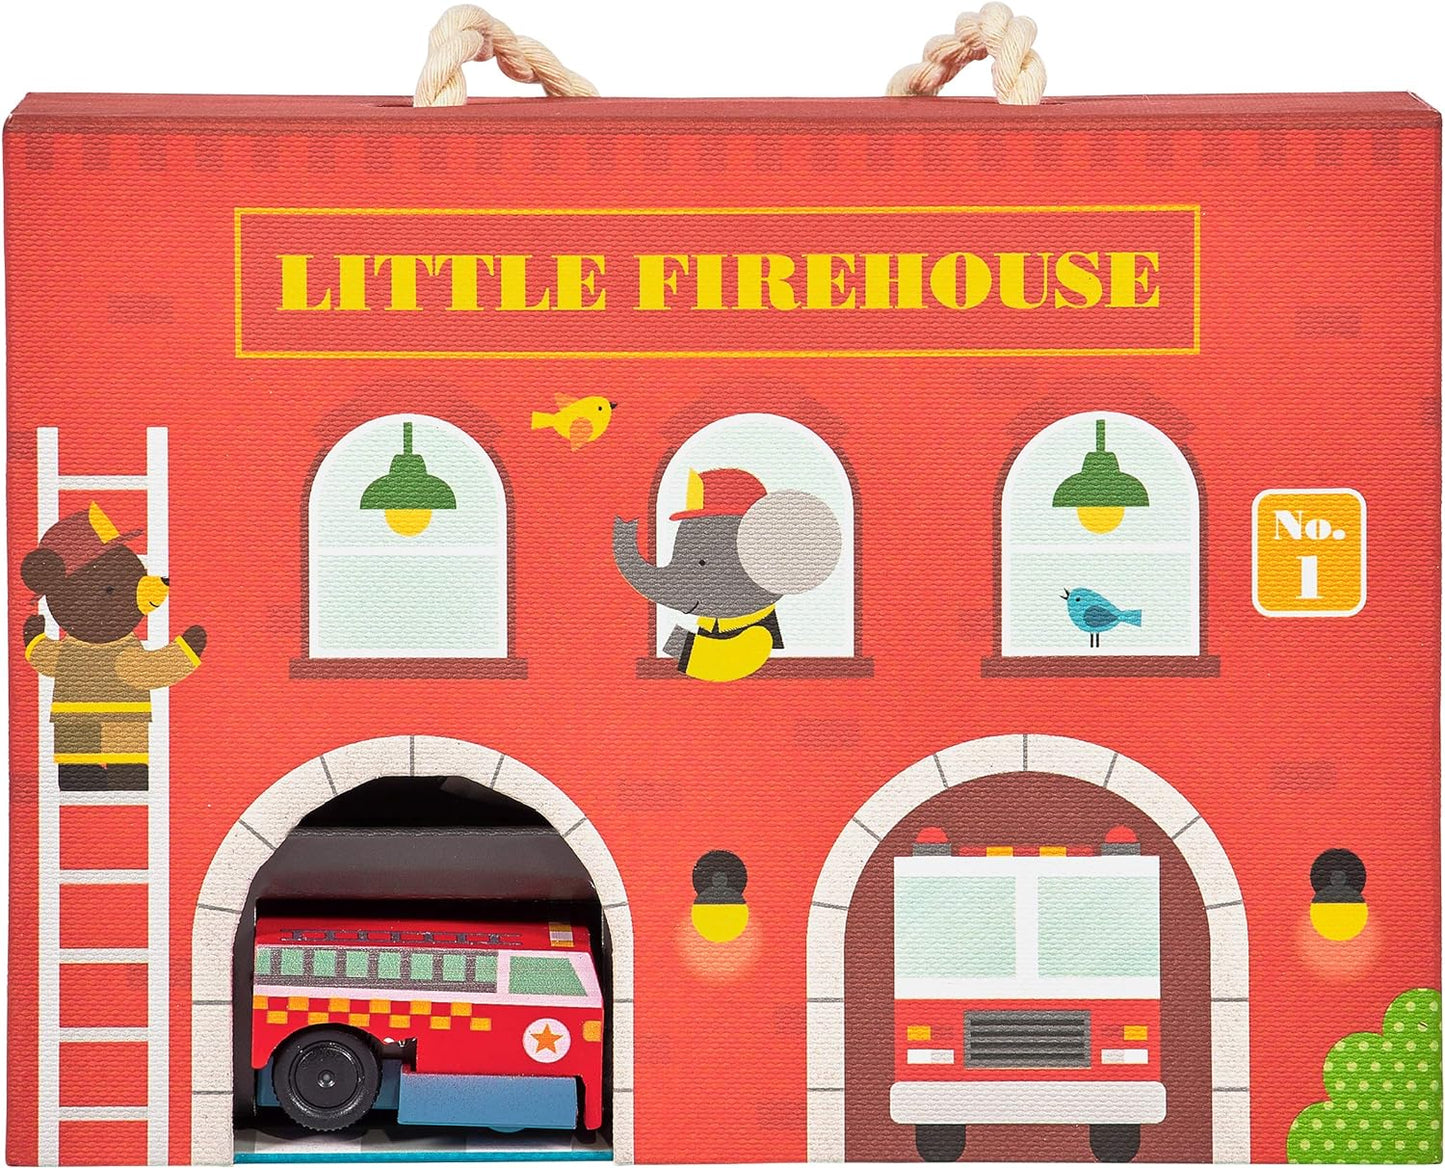 Little Firehouse - Wind up and Go Play Set